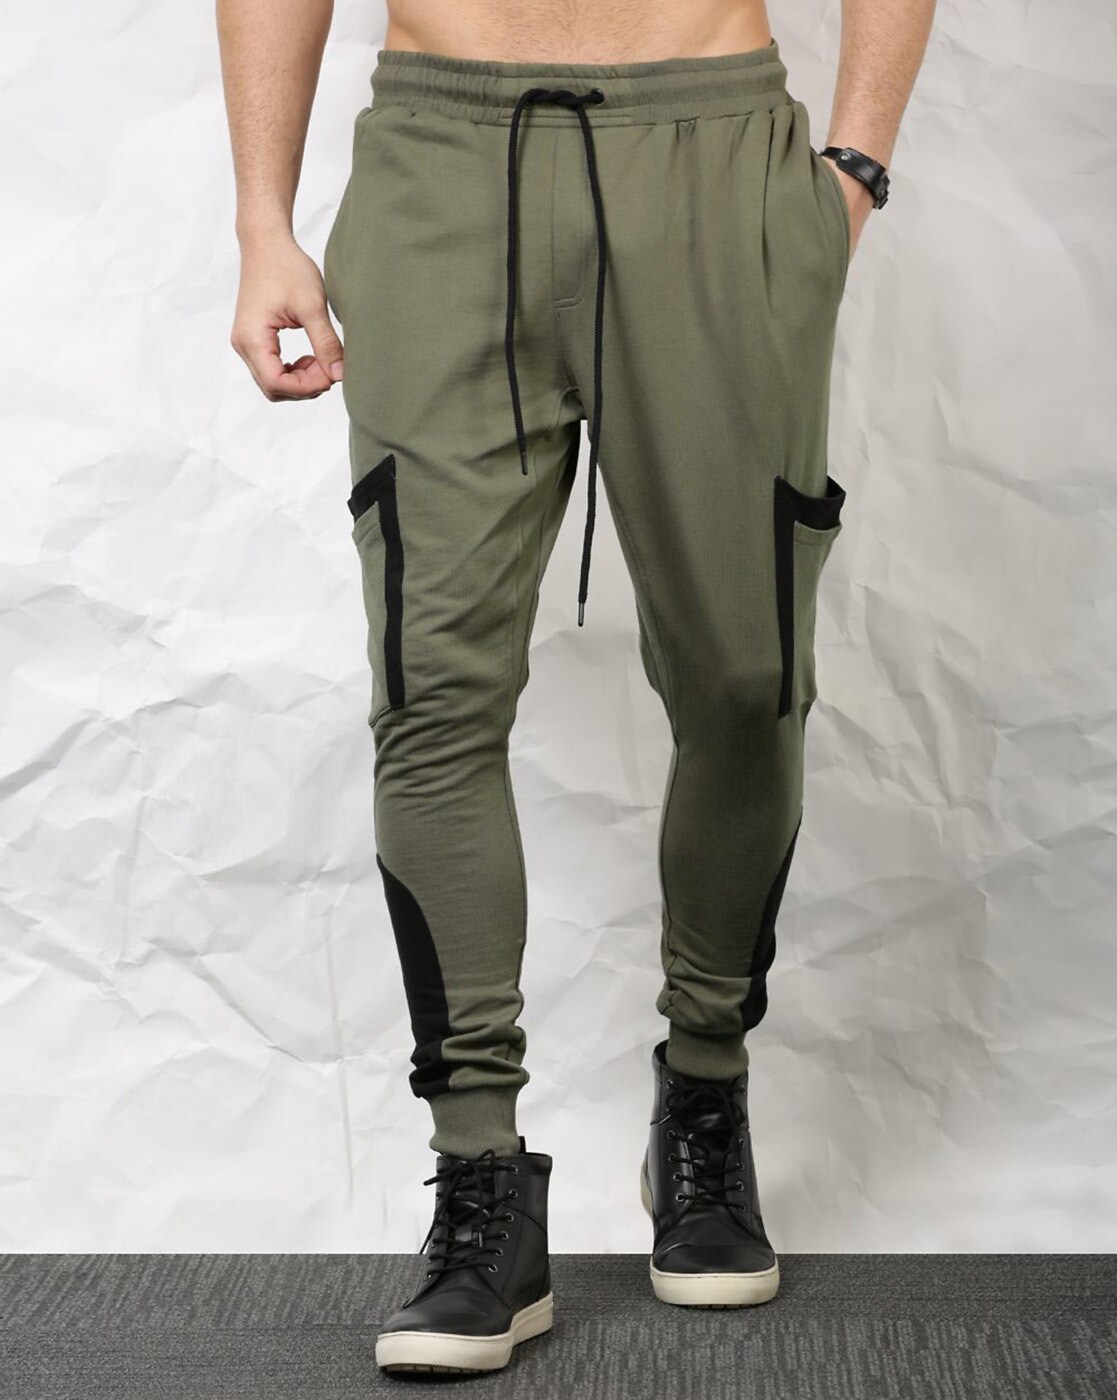 Buy skult by shahid kapoor track pants in India @ Limeroad